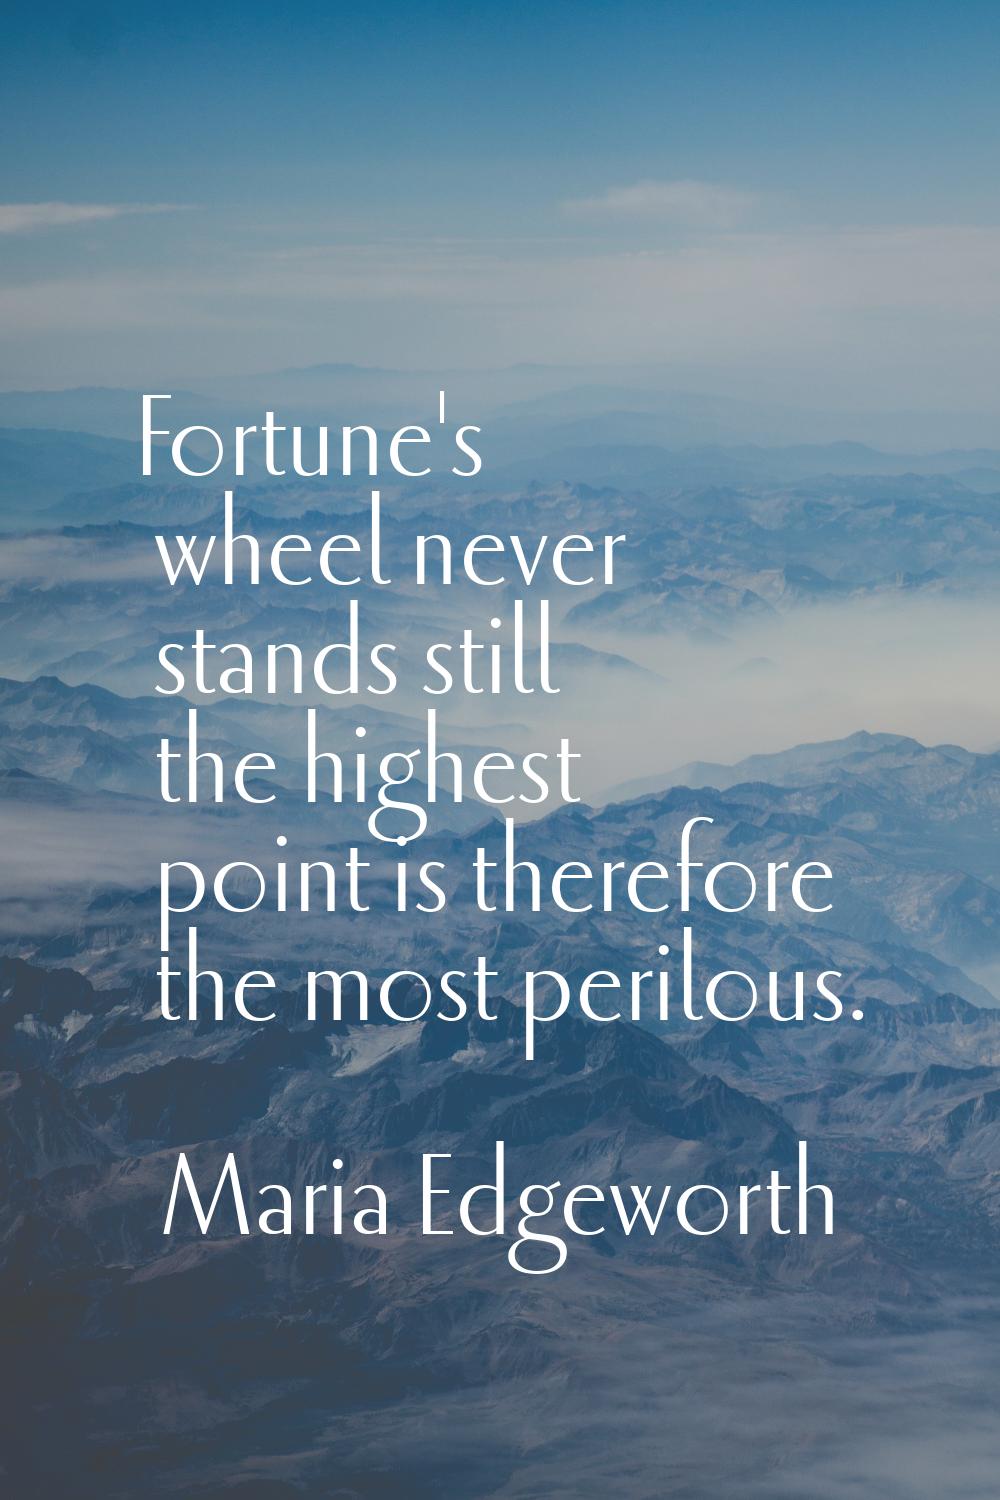 Fortune's wheel never stands still the highest point is therefore the most perilous.